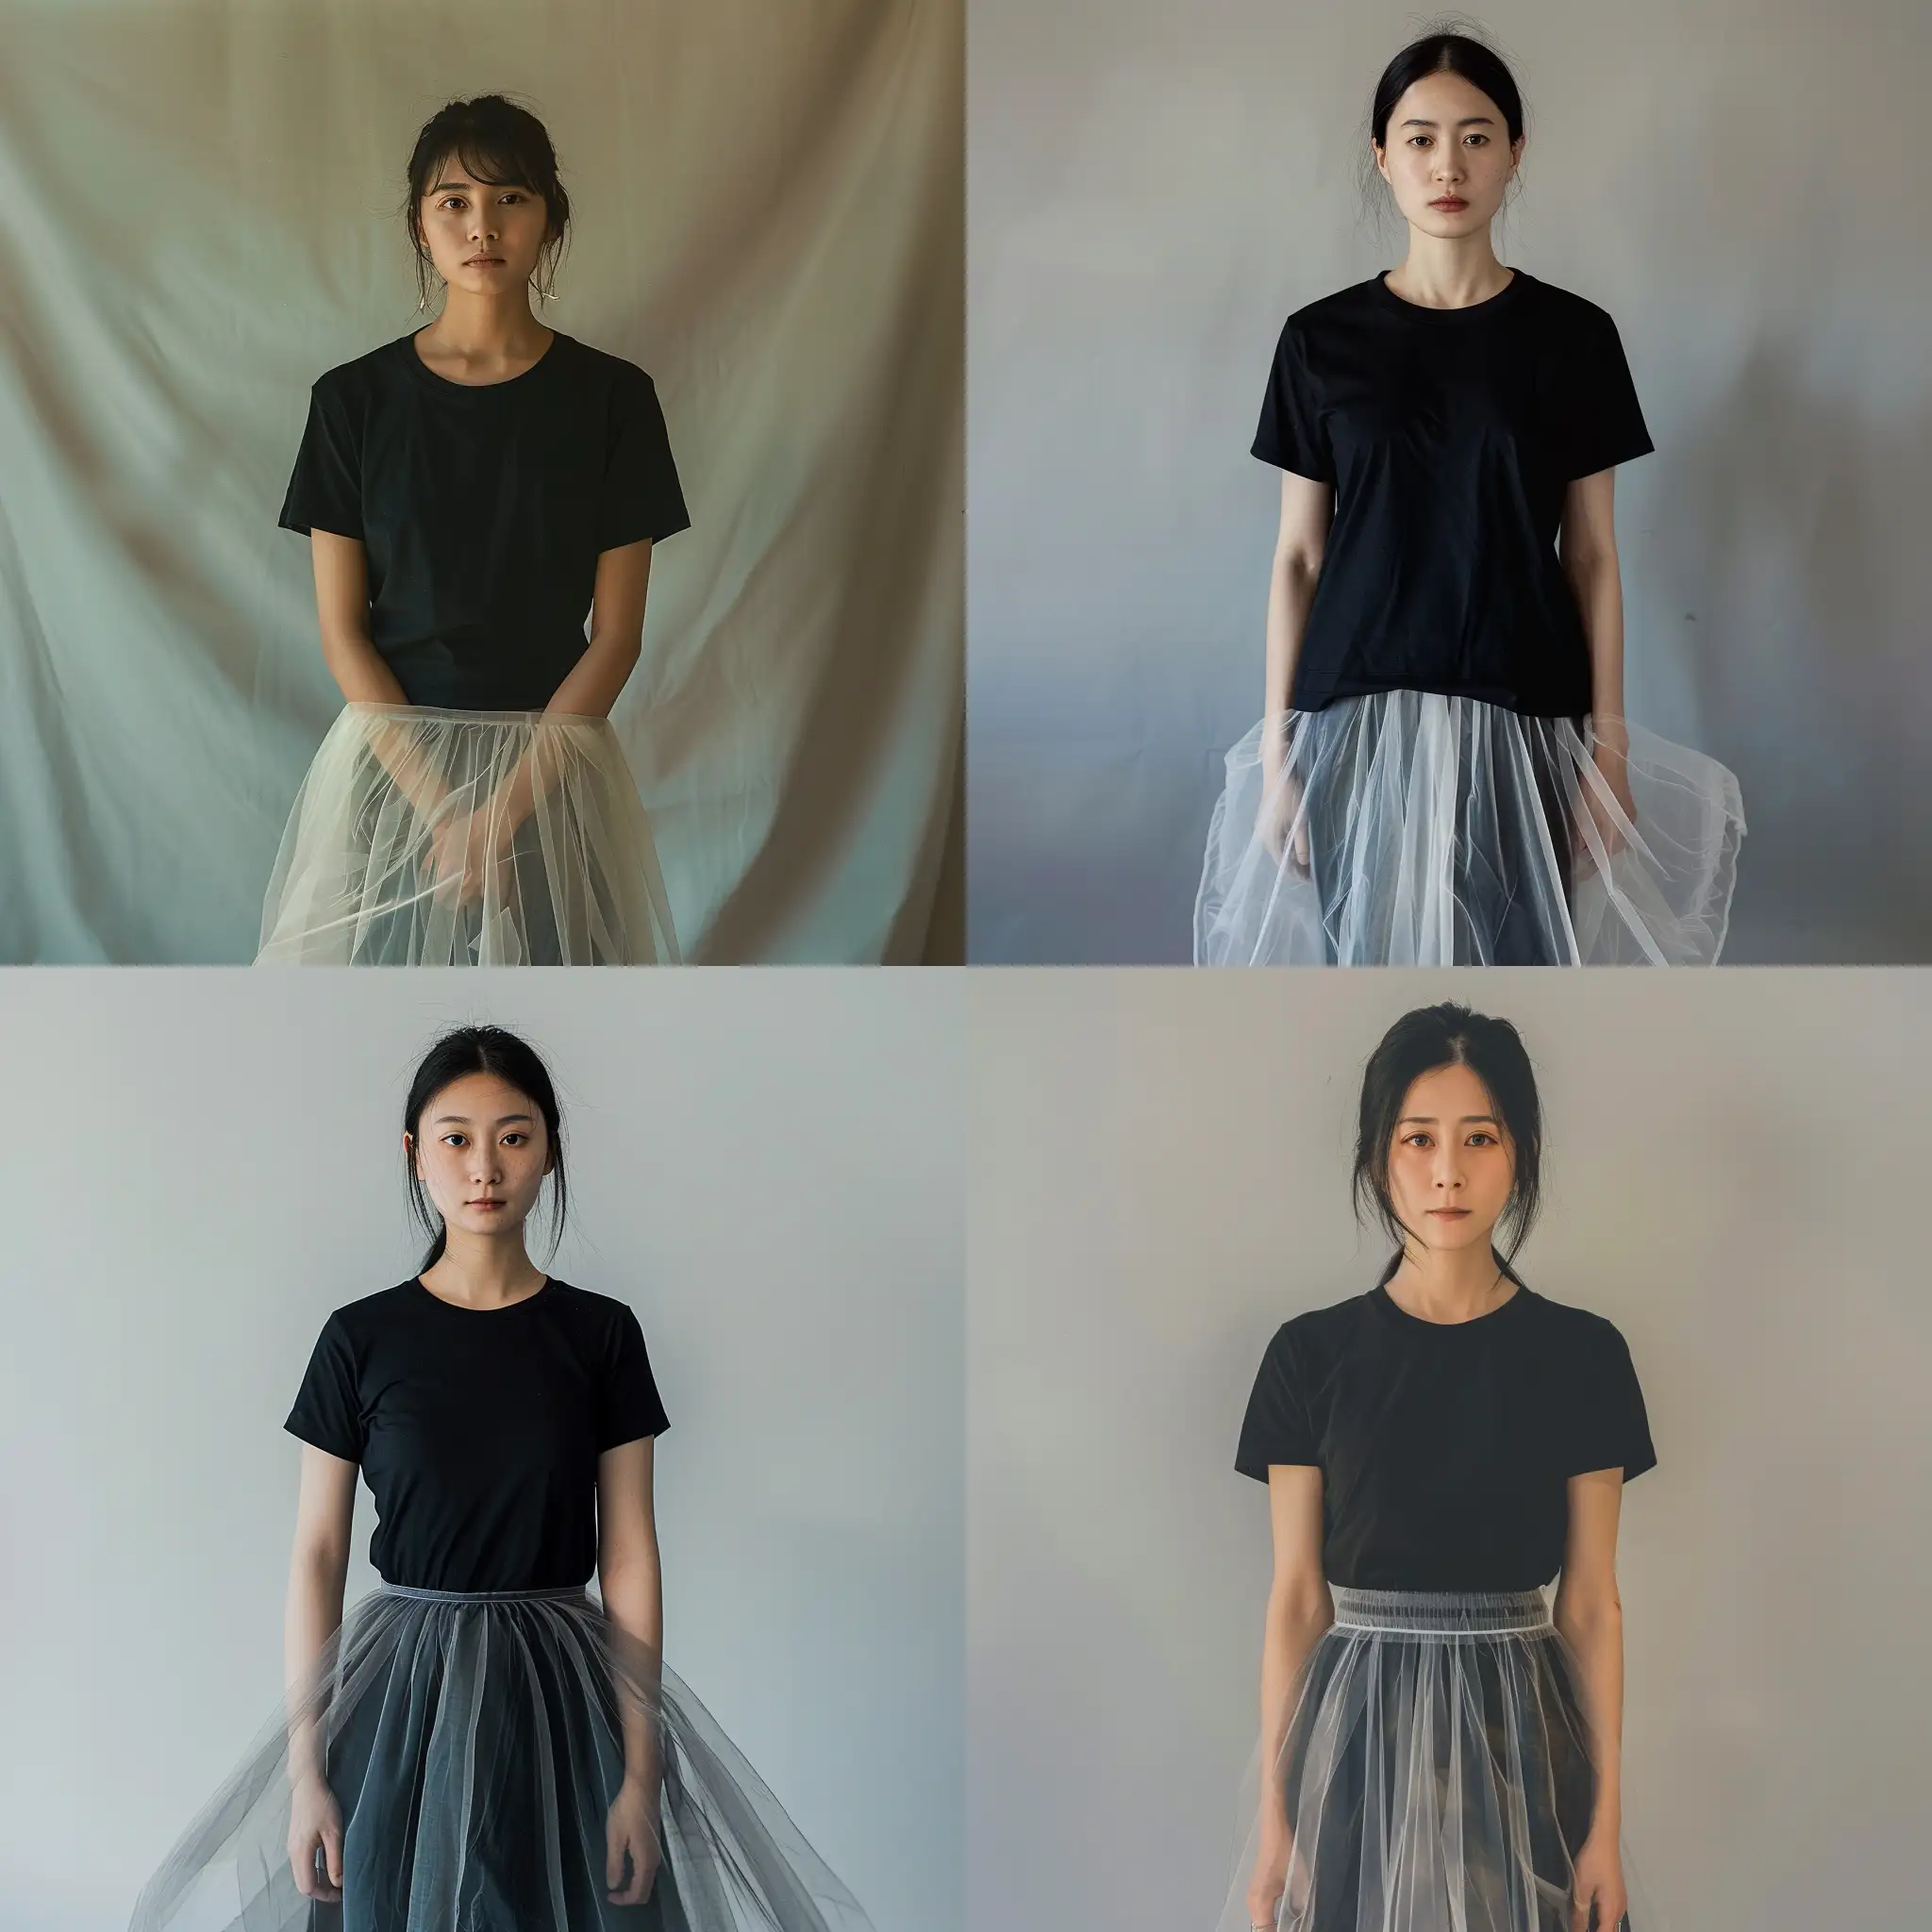 Ren Hang's photograph depicting a photo of a woman with a black t-shirt and translucient long skirt --style raw